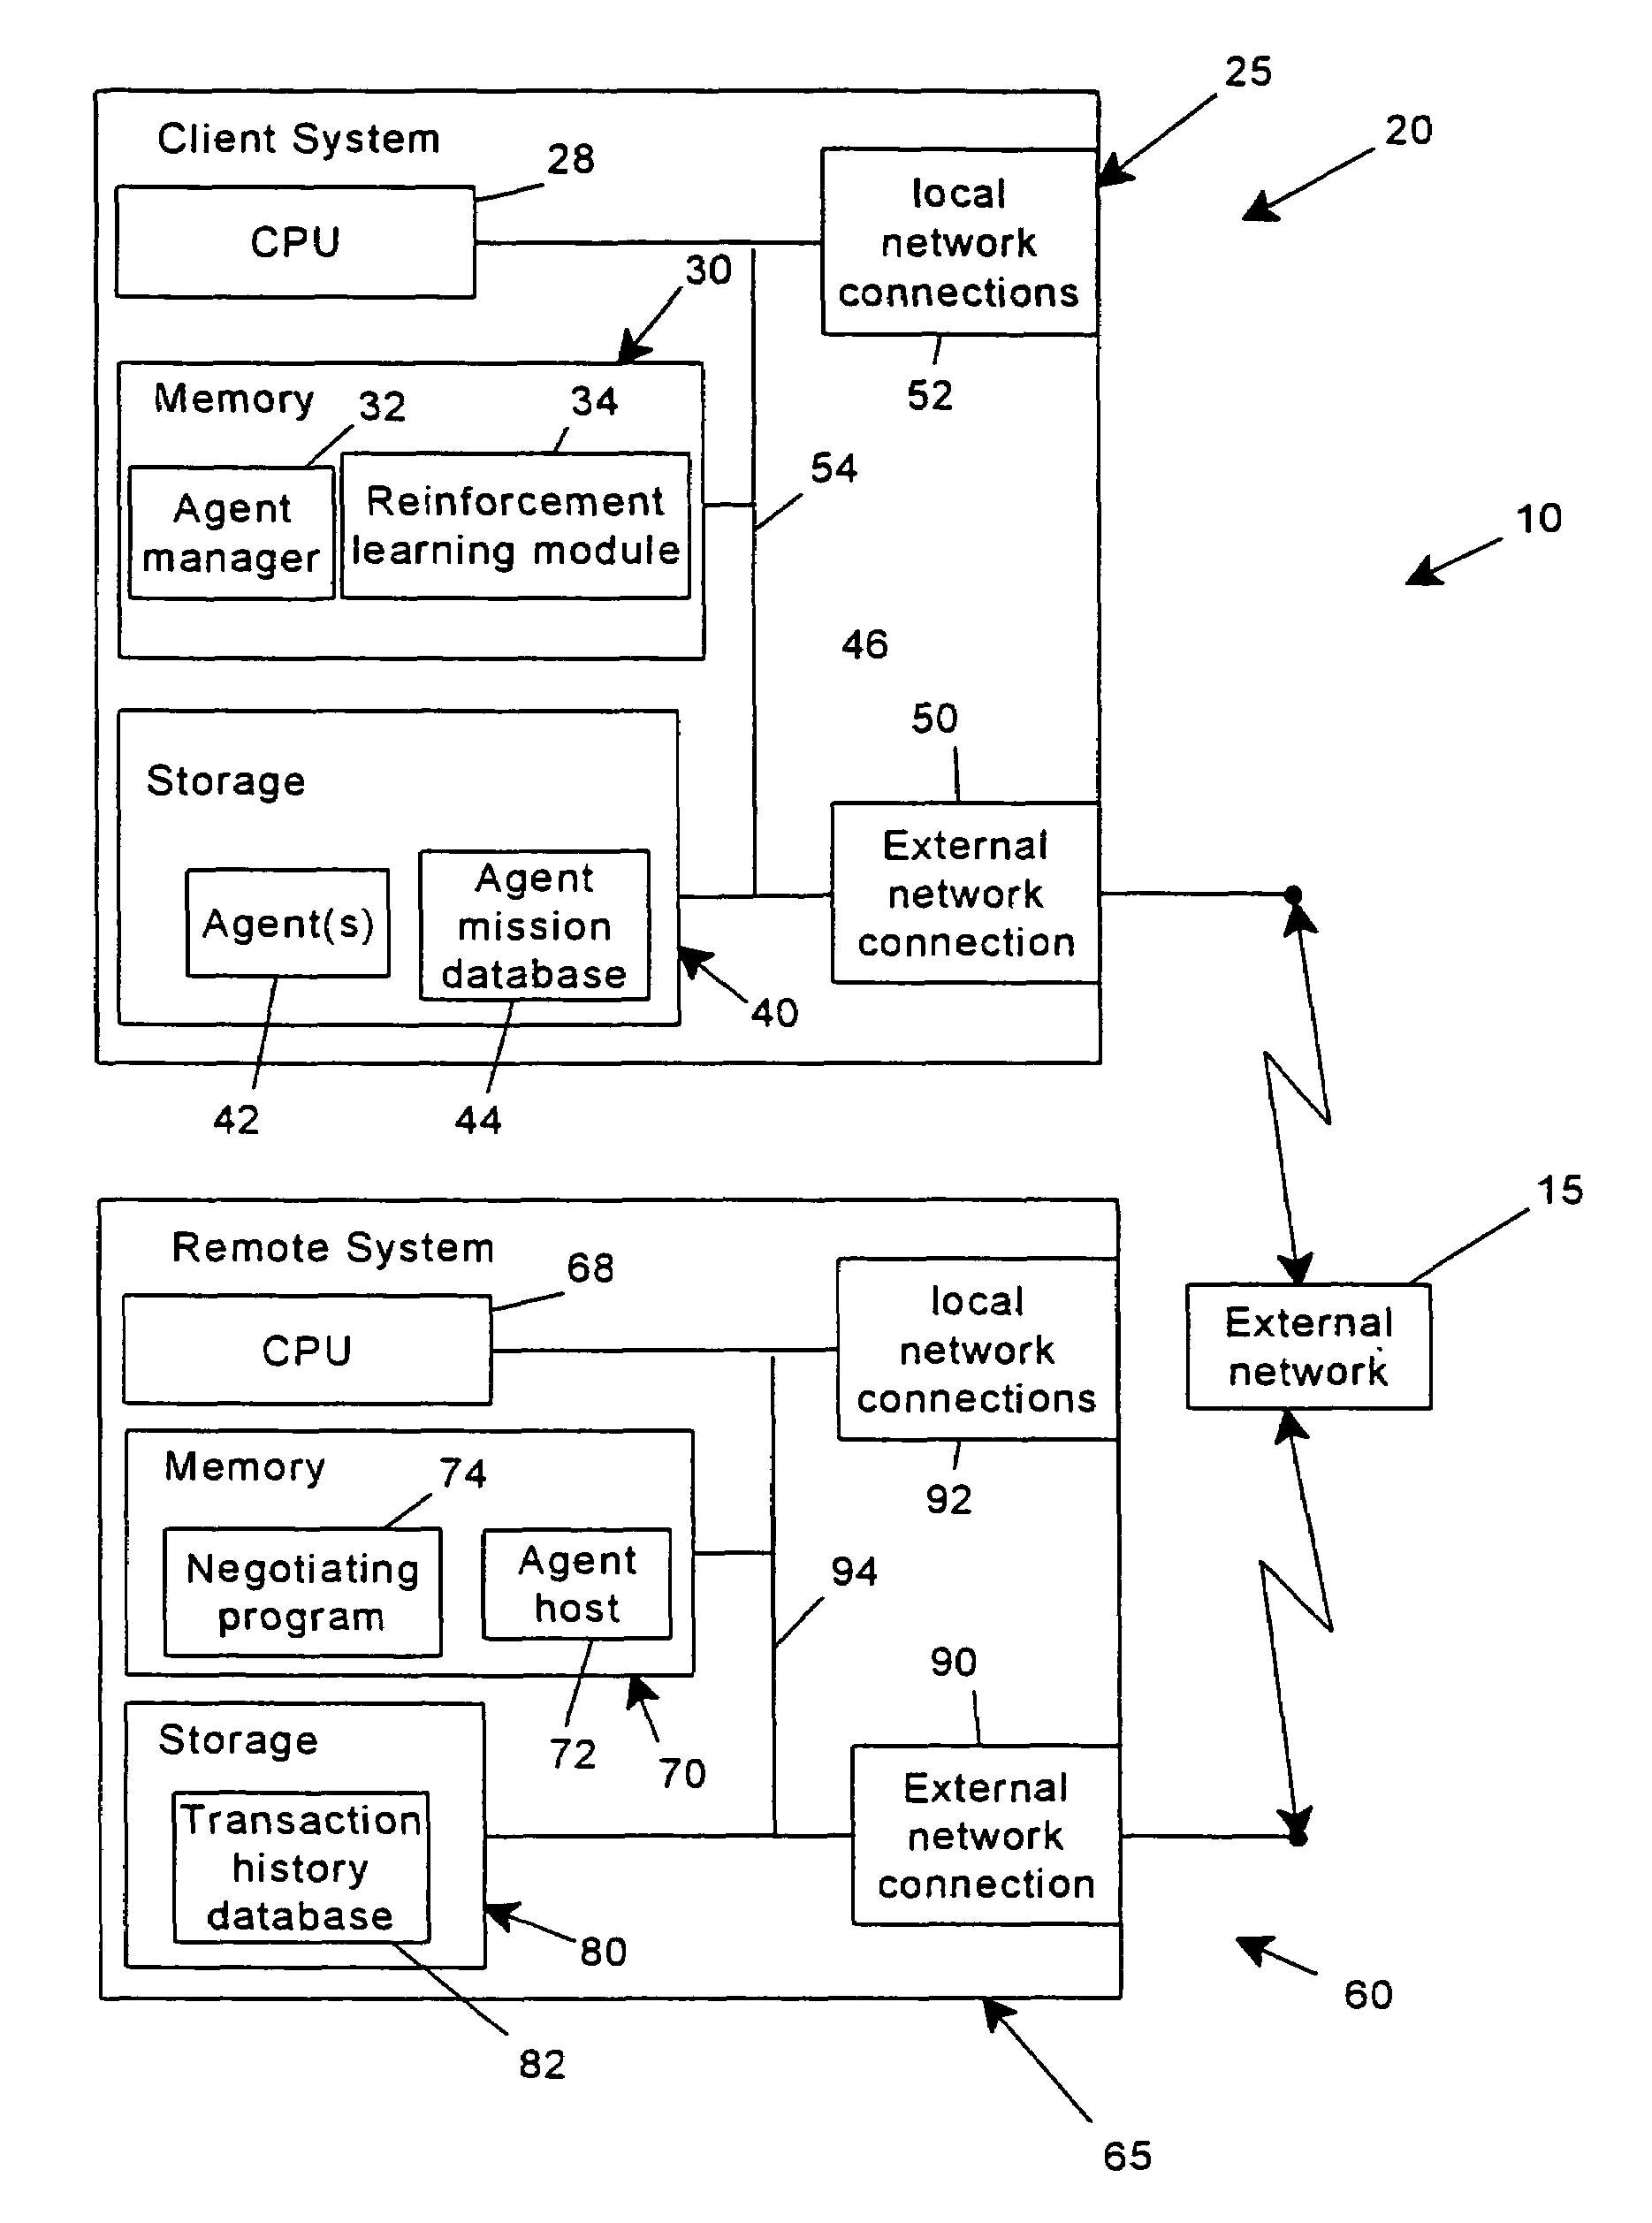 Optimizing the performance of computer tasks using intelligent agent with multiple program modules having varied degrees of domain knowledge